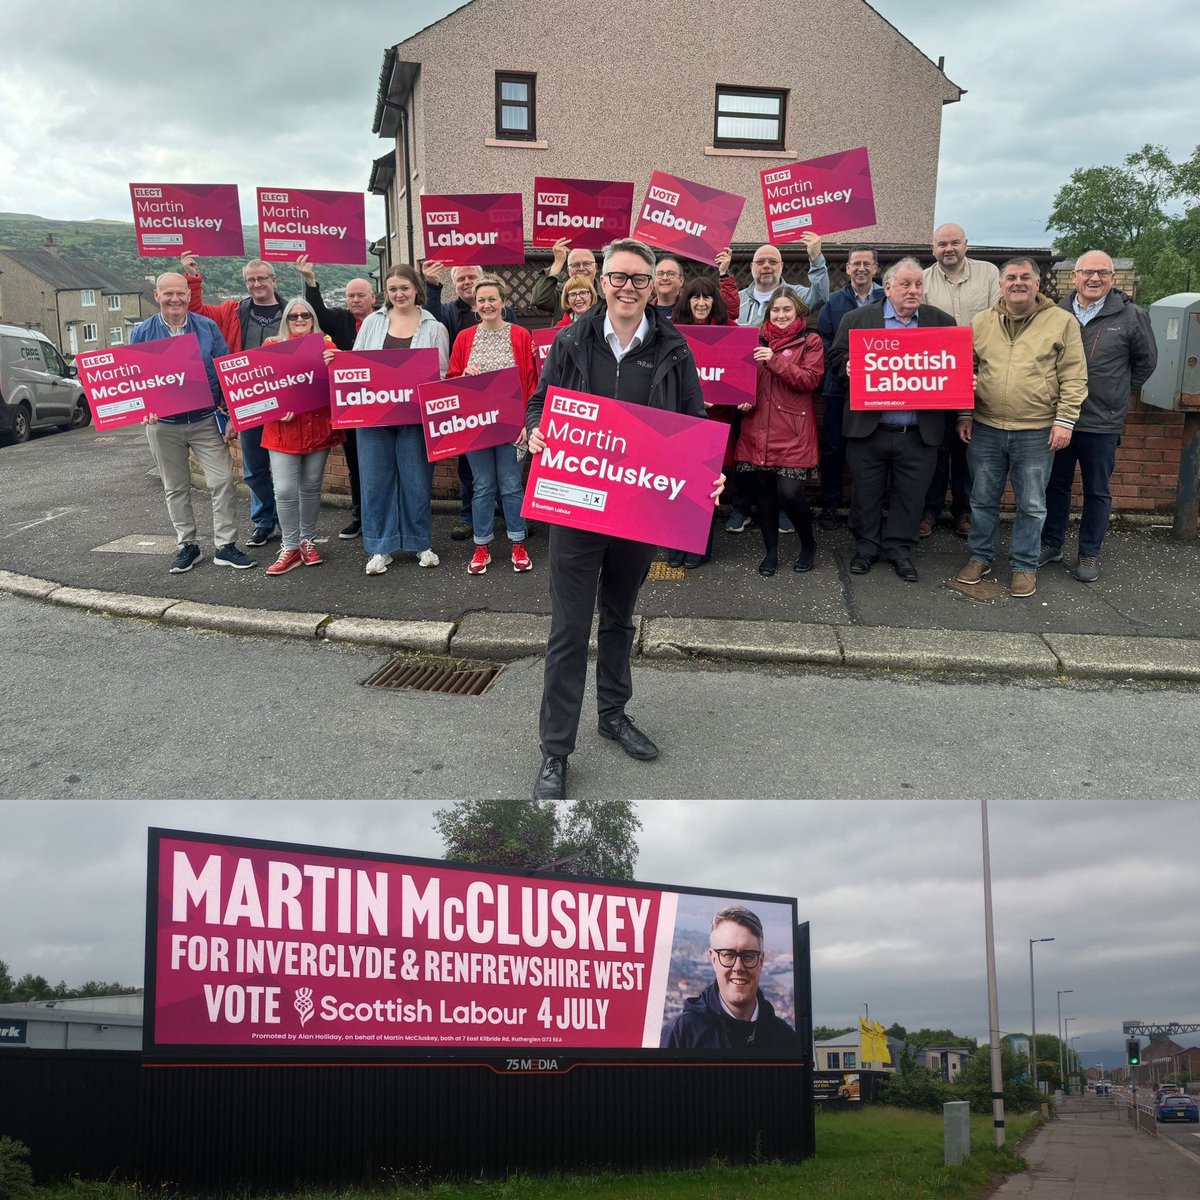 Great team, great response - getting the @ScottishLabour message out there in Inverclyde and Renfrewshire West! #VoteScotLab24